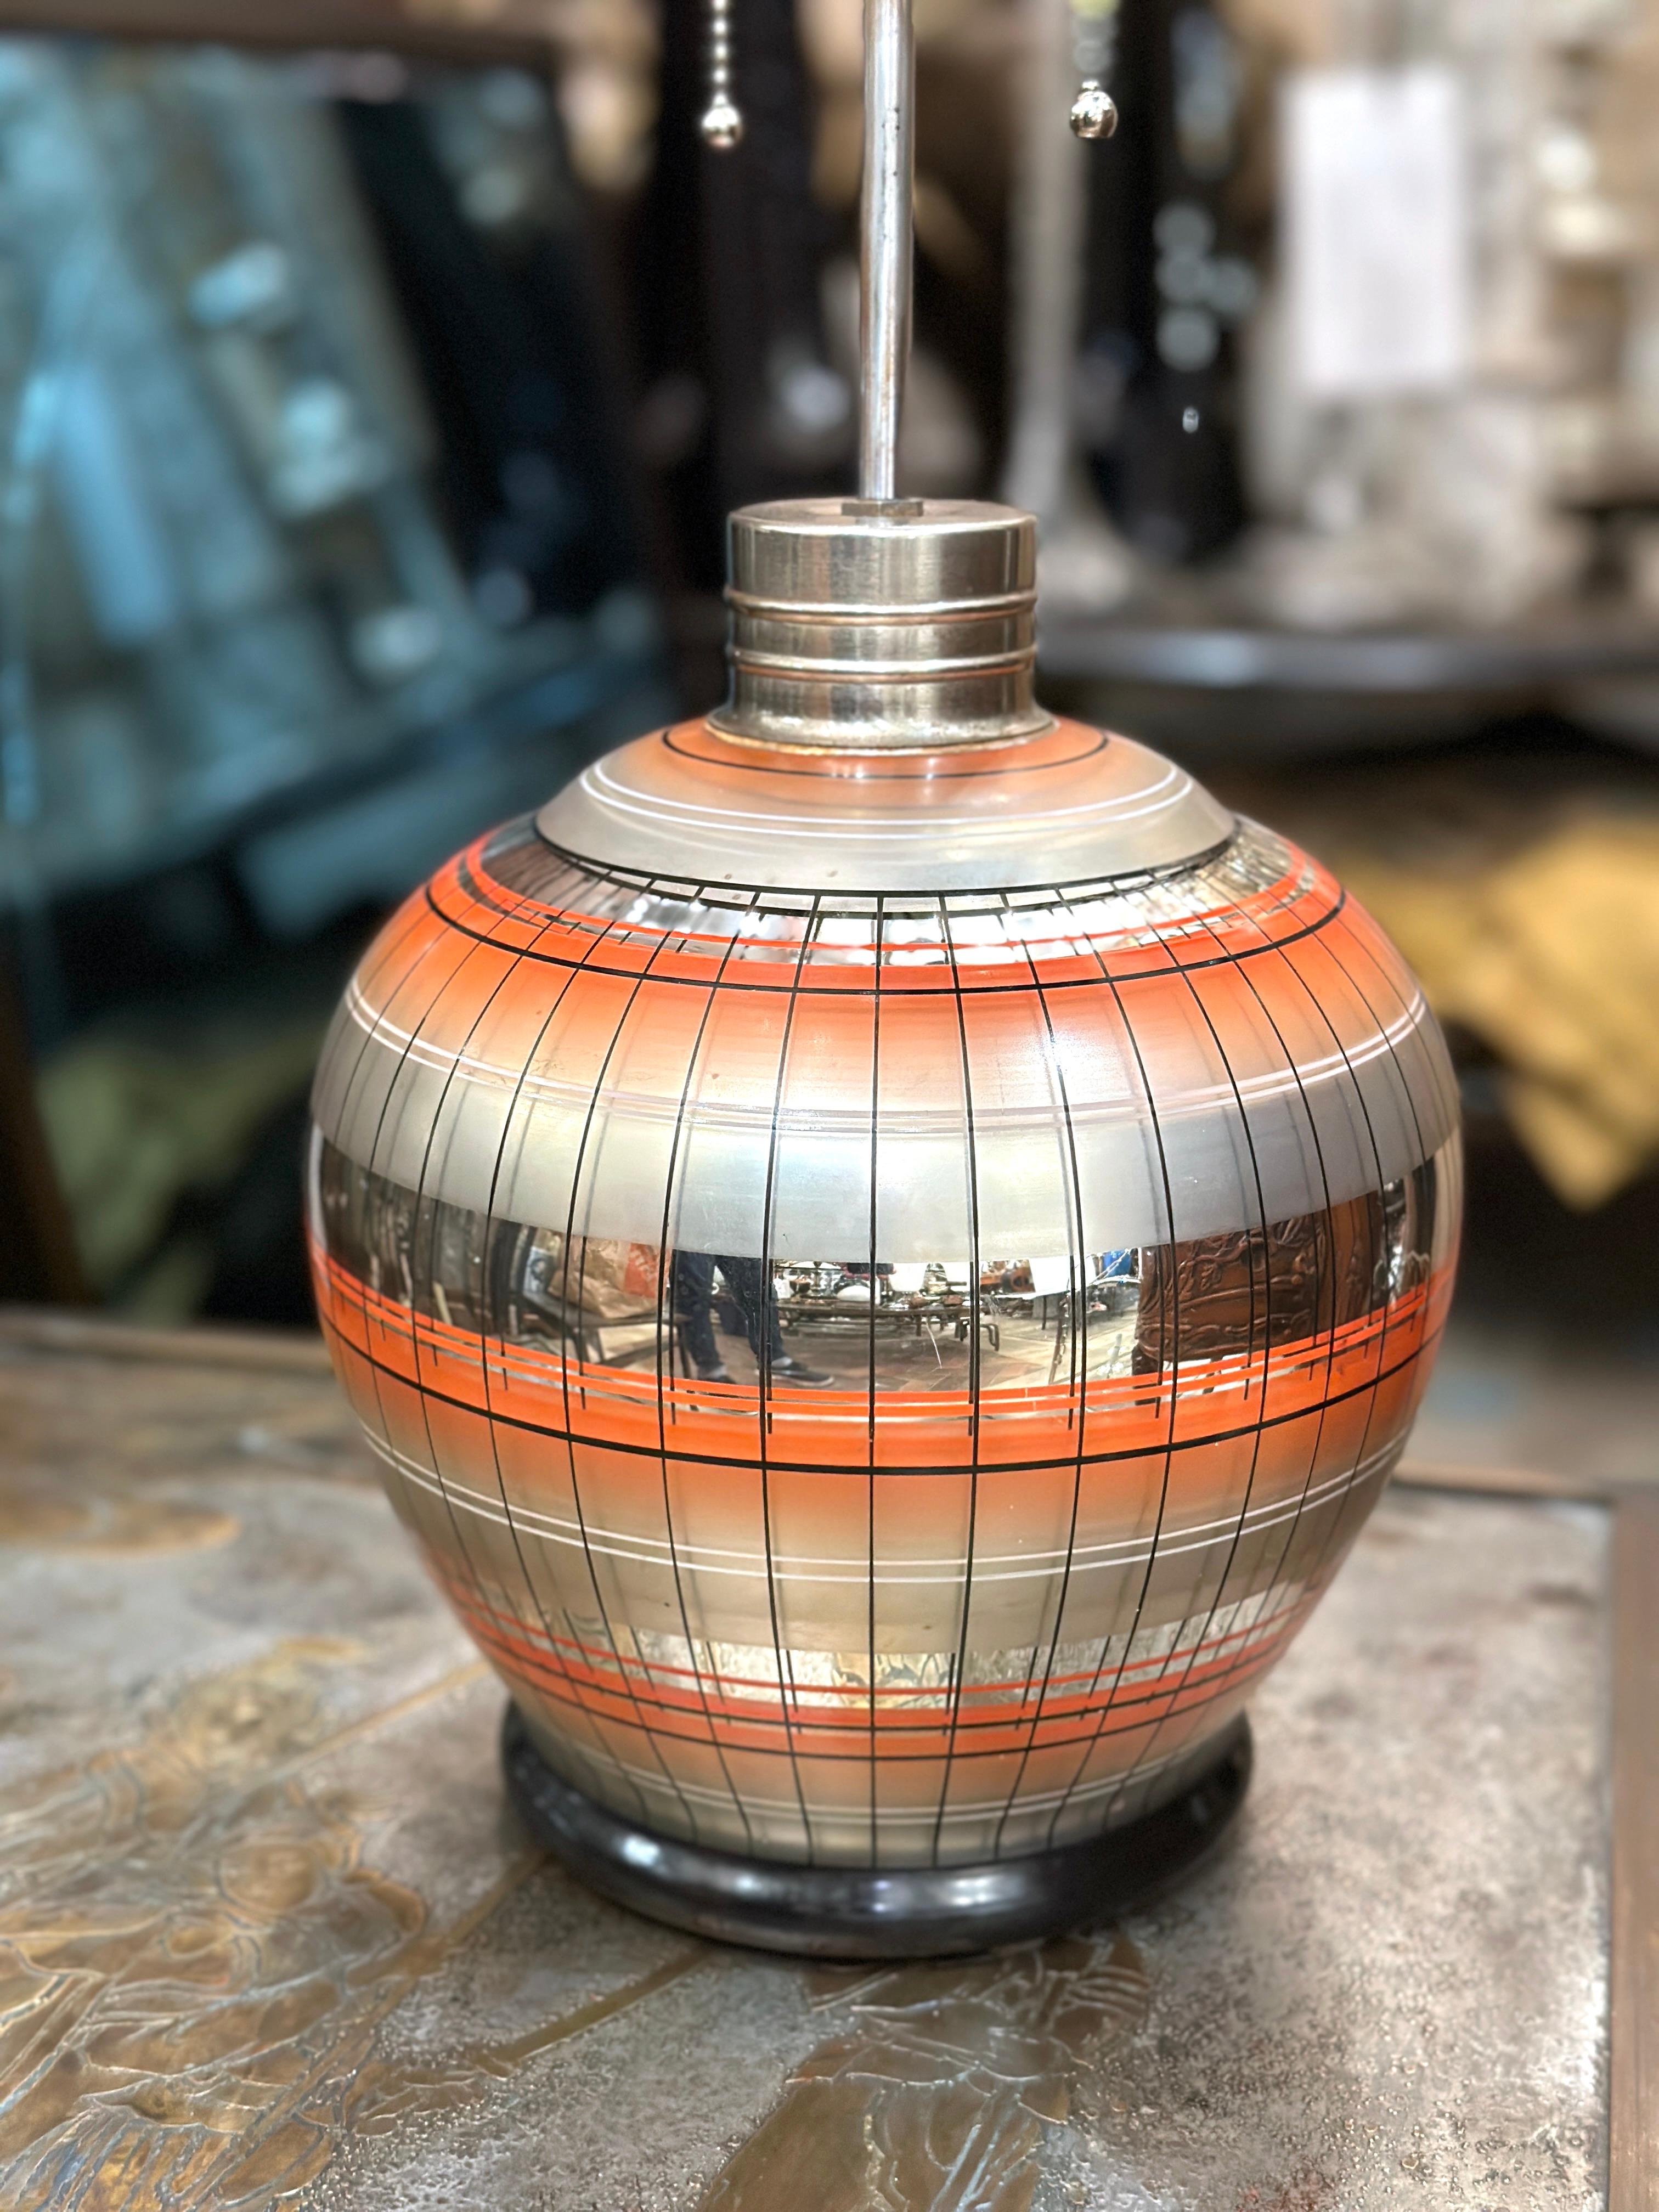 A single circa 1930's Austrian mercury glass lamp with orange details.

Measurements:
Height of body: 10